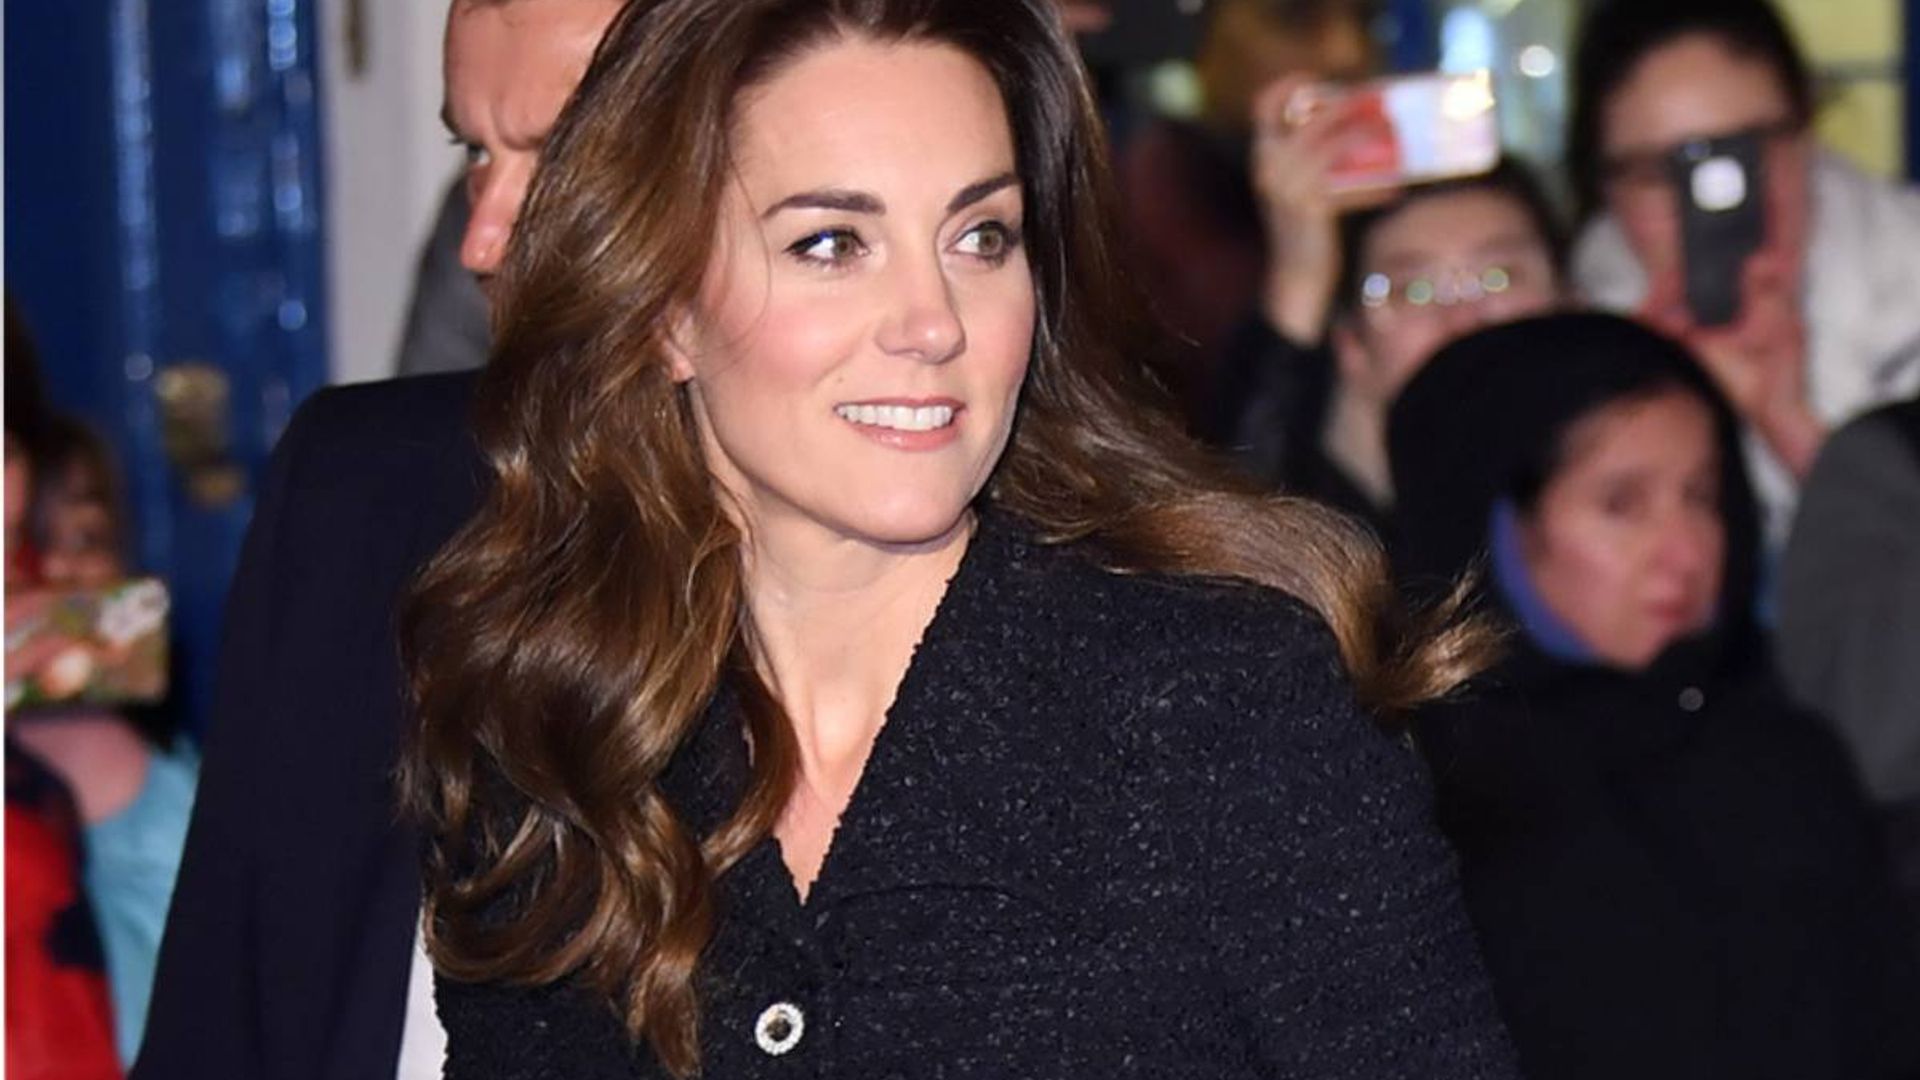 Kate Middleton’s glittery party shoes are on sale - and they’re now in bubblegum pink